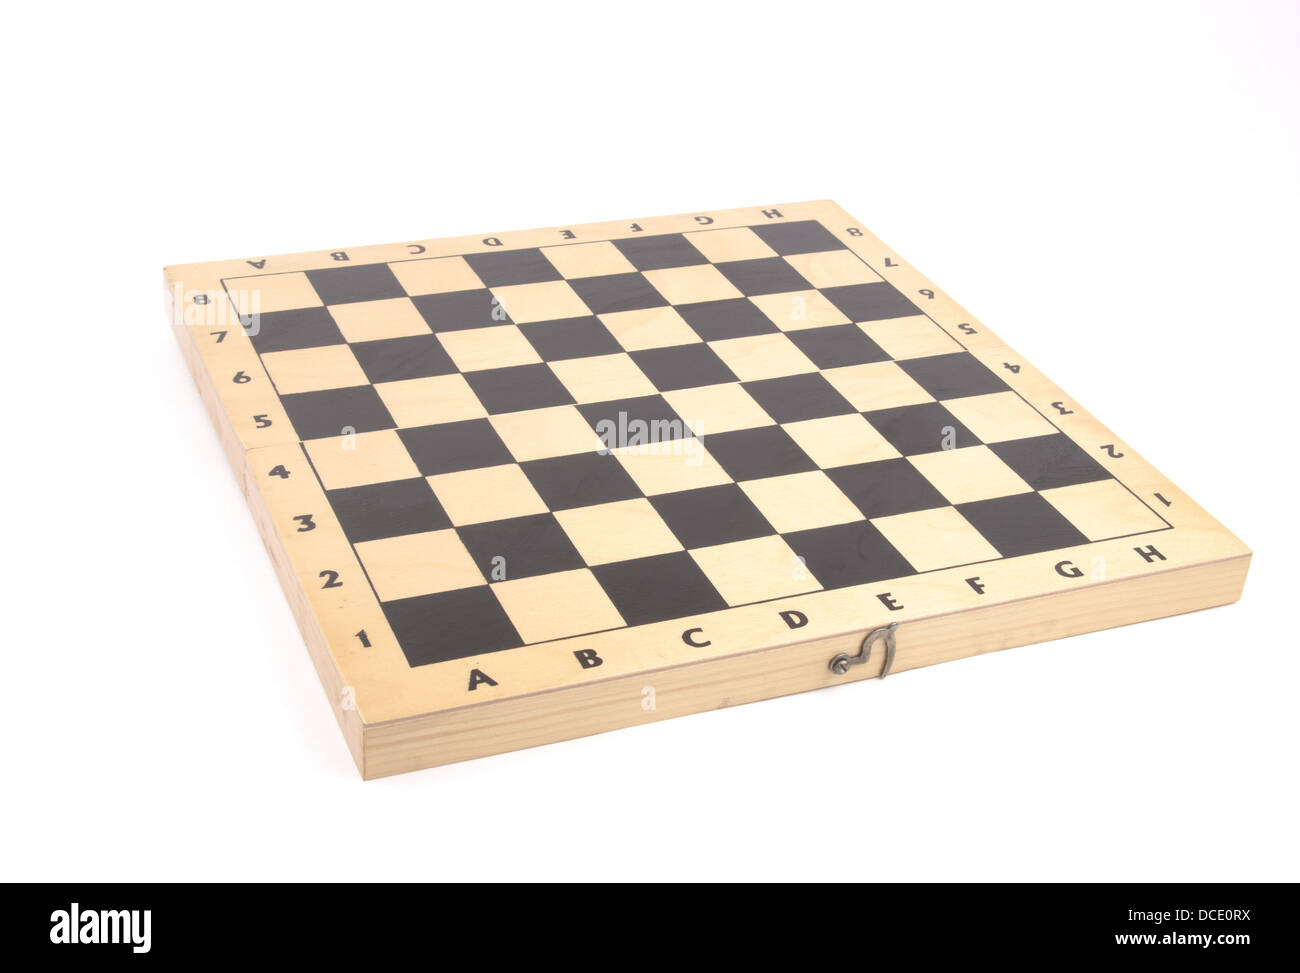 Large 19" By 19" Chocolate Wood Silk Screened Checkered Squares Chess Board Game 